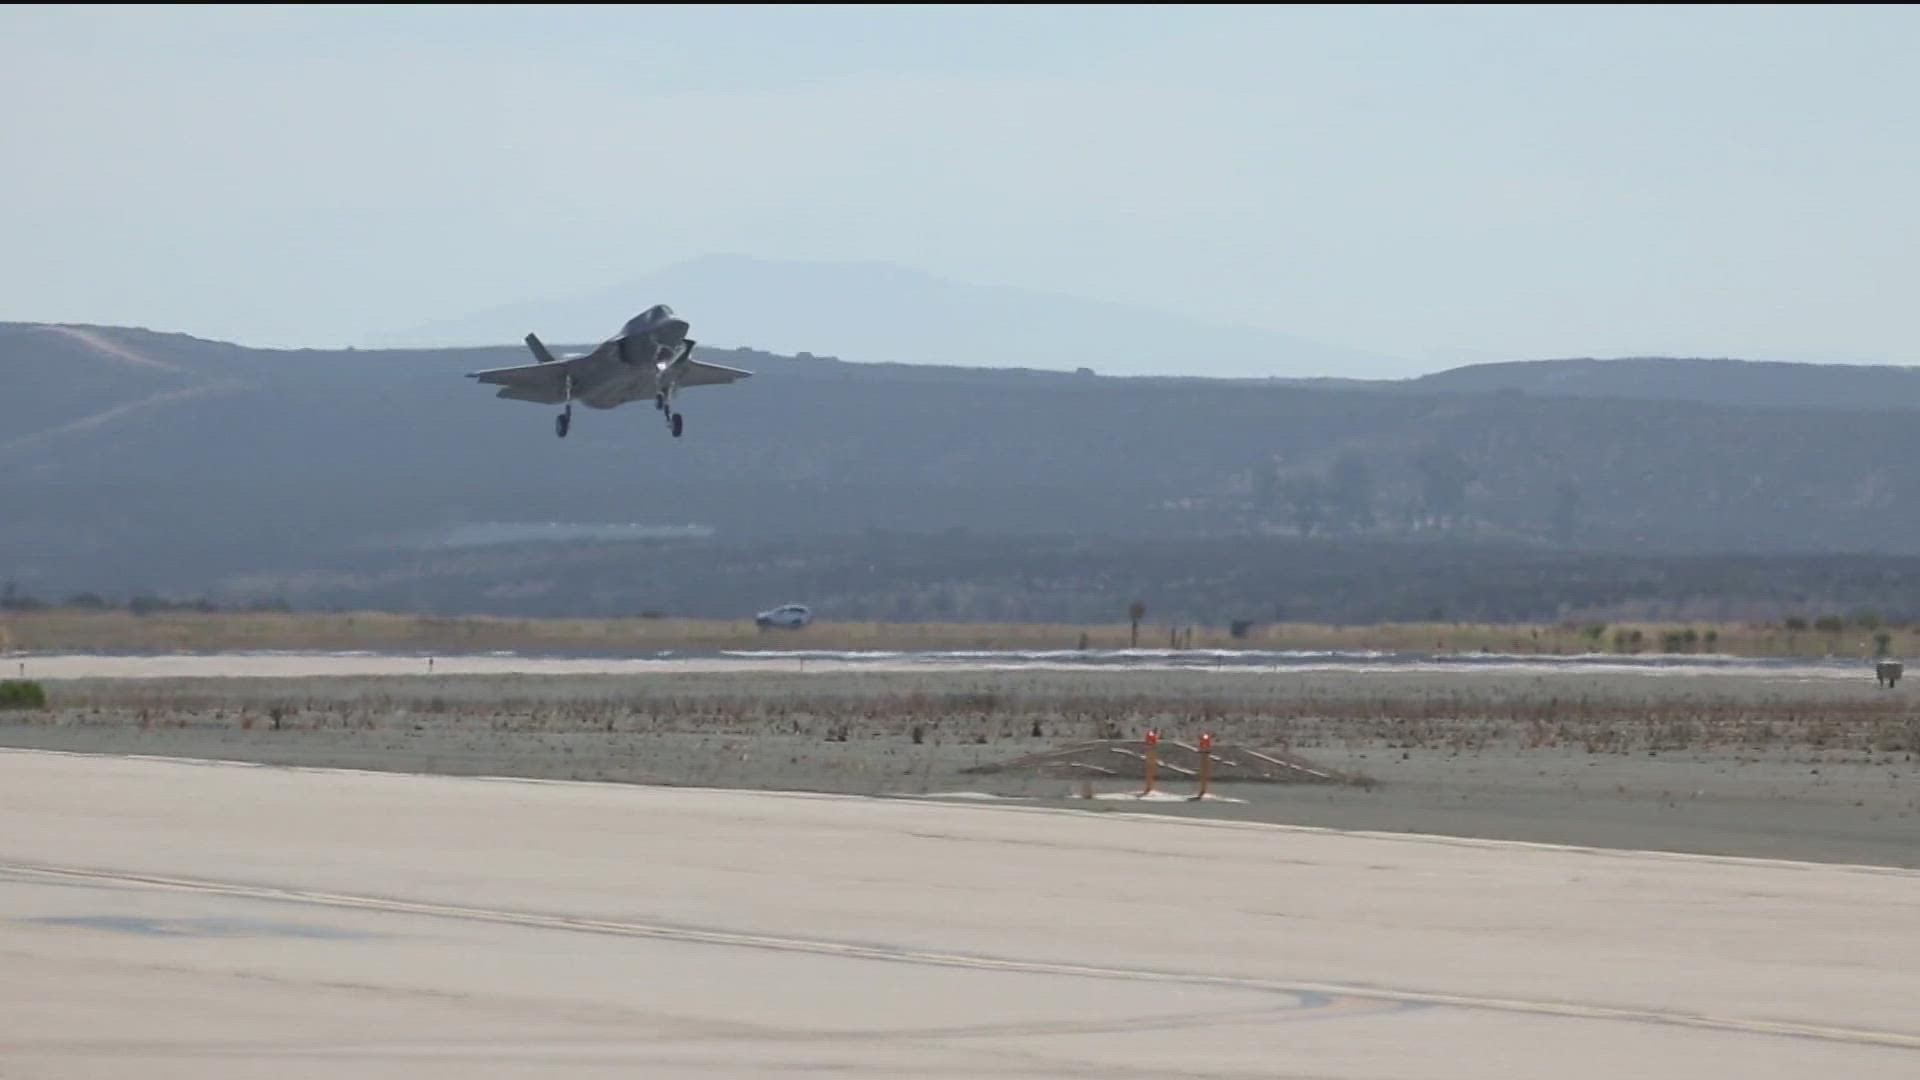 Aircraft like the F-35 can reach 1,200 mph, which makes for a unique experience in the sky.